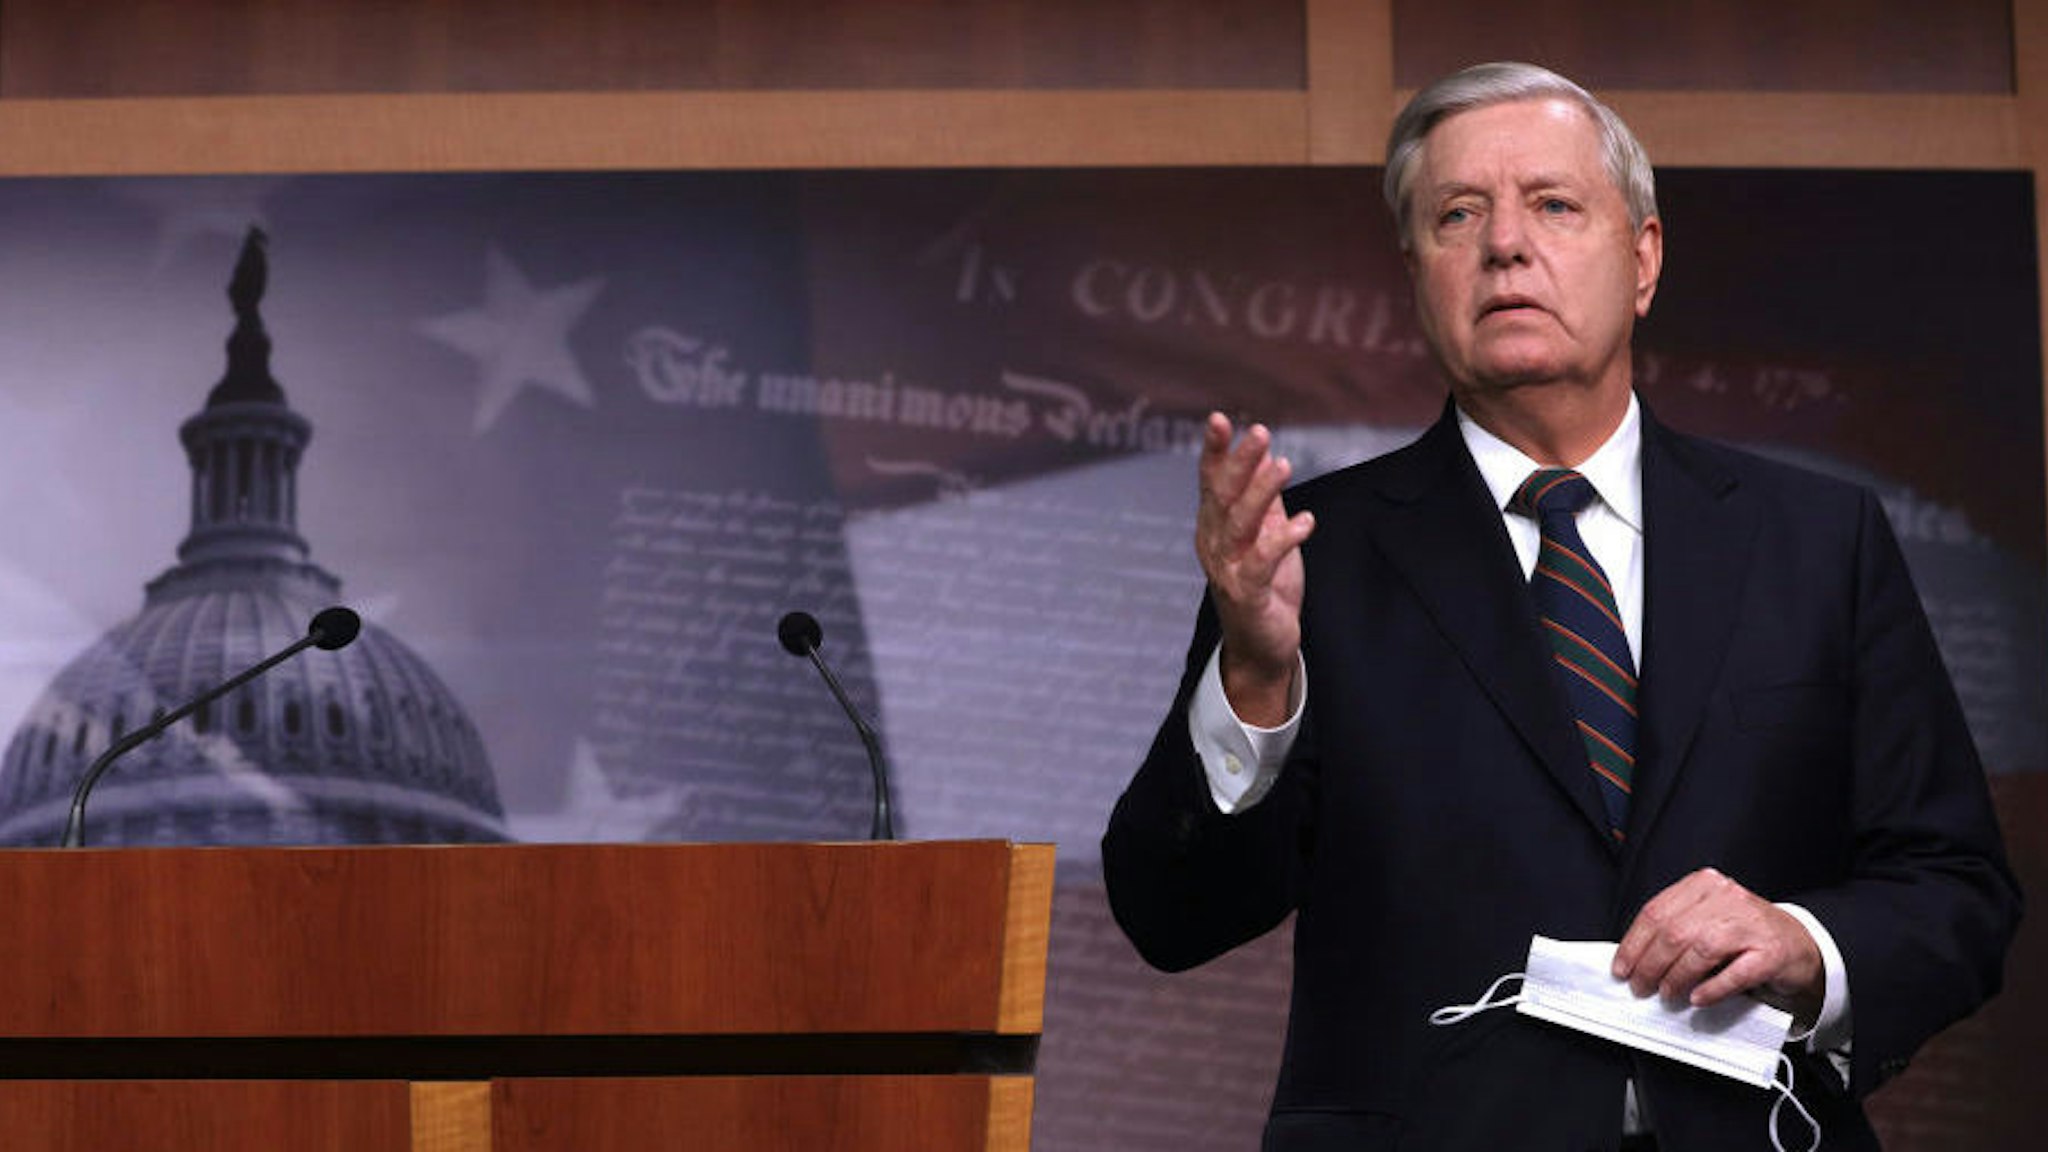 WASHINGTON, DC - JANUARY 07: U.S. Sen. Lindsey Graham (R-SC) speaks during a news conference at the U.S. Capitol January 7, 2021 in Washington, DC. Sen. Graham condemned the pro-Trump mob’s action of storming the Capitol the day before.